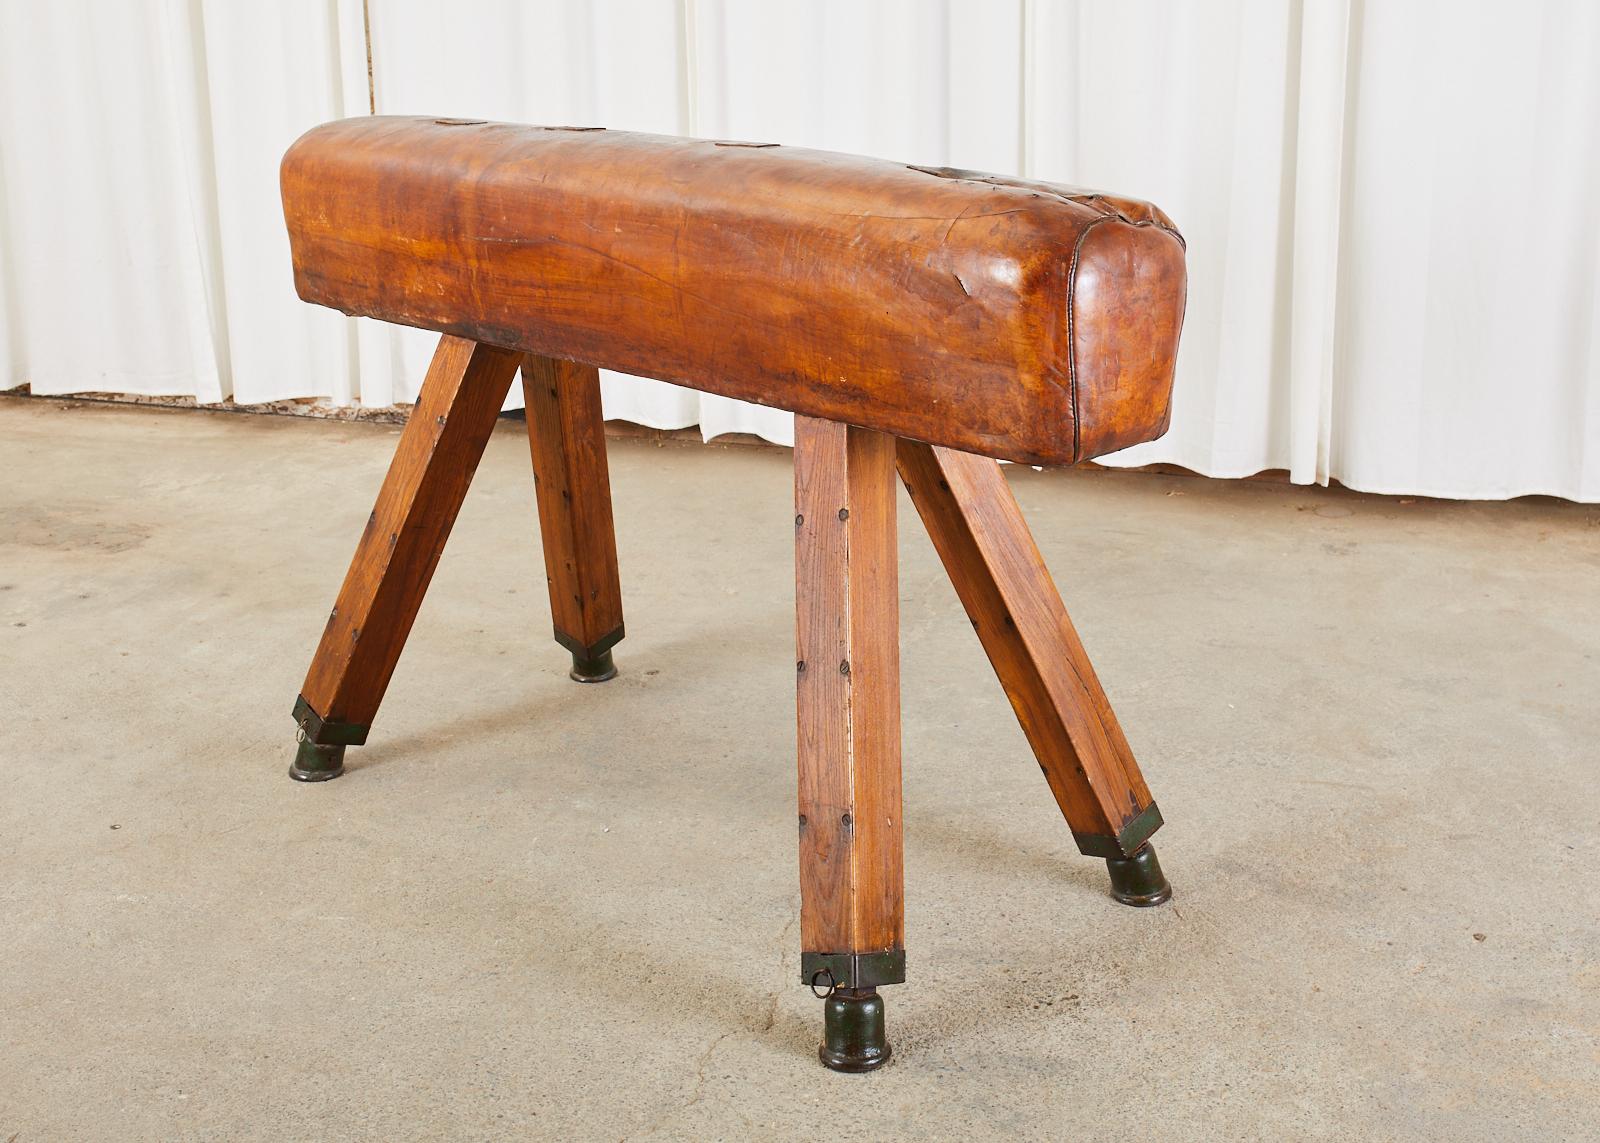 Large 19th century English gymnastic pommel horse or bench vault. Features an oak and iron frame covered with a rich patinated cognac leather. The leather cover is complete and pliable with several old repairs that add character and charm to the